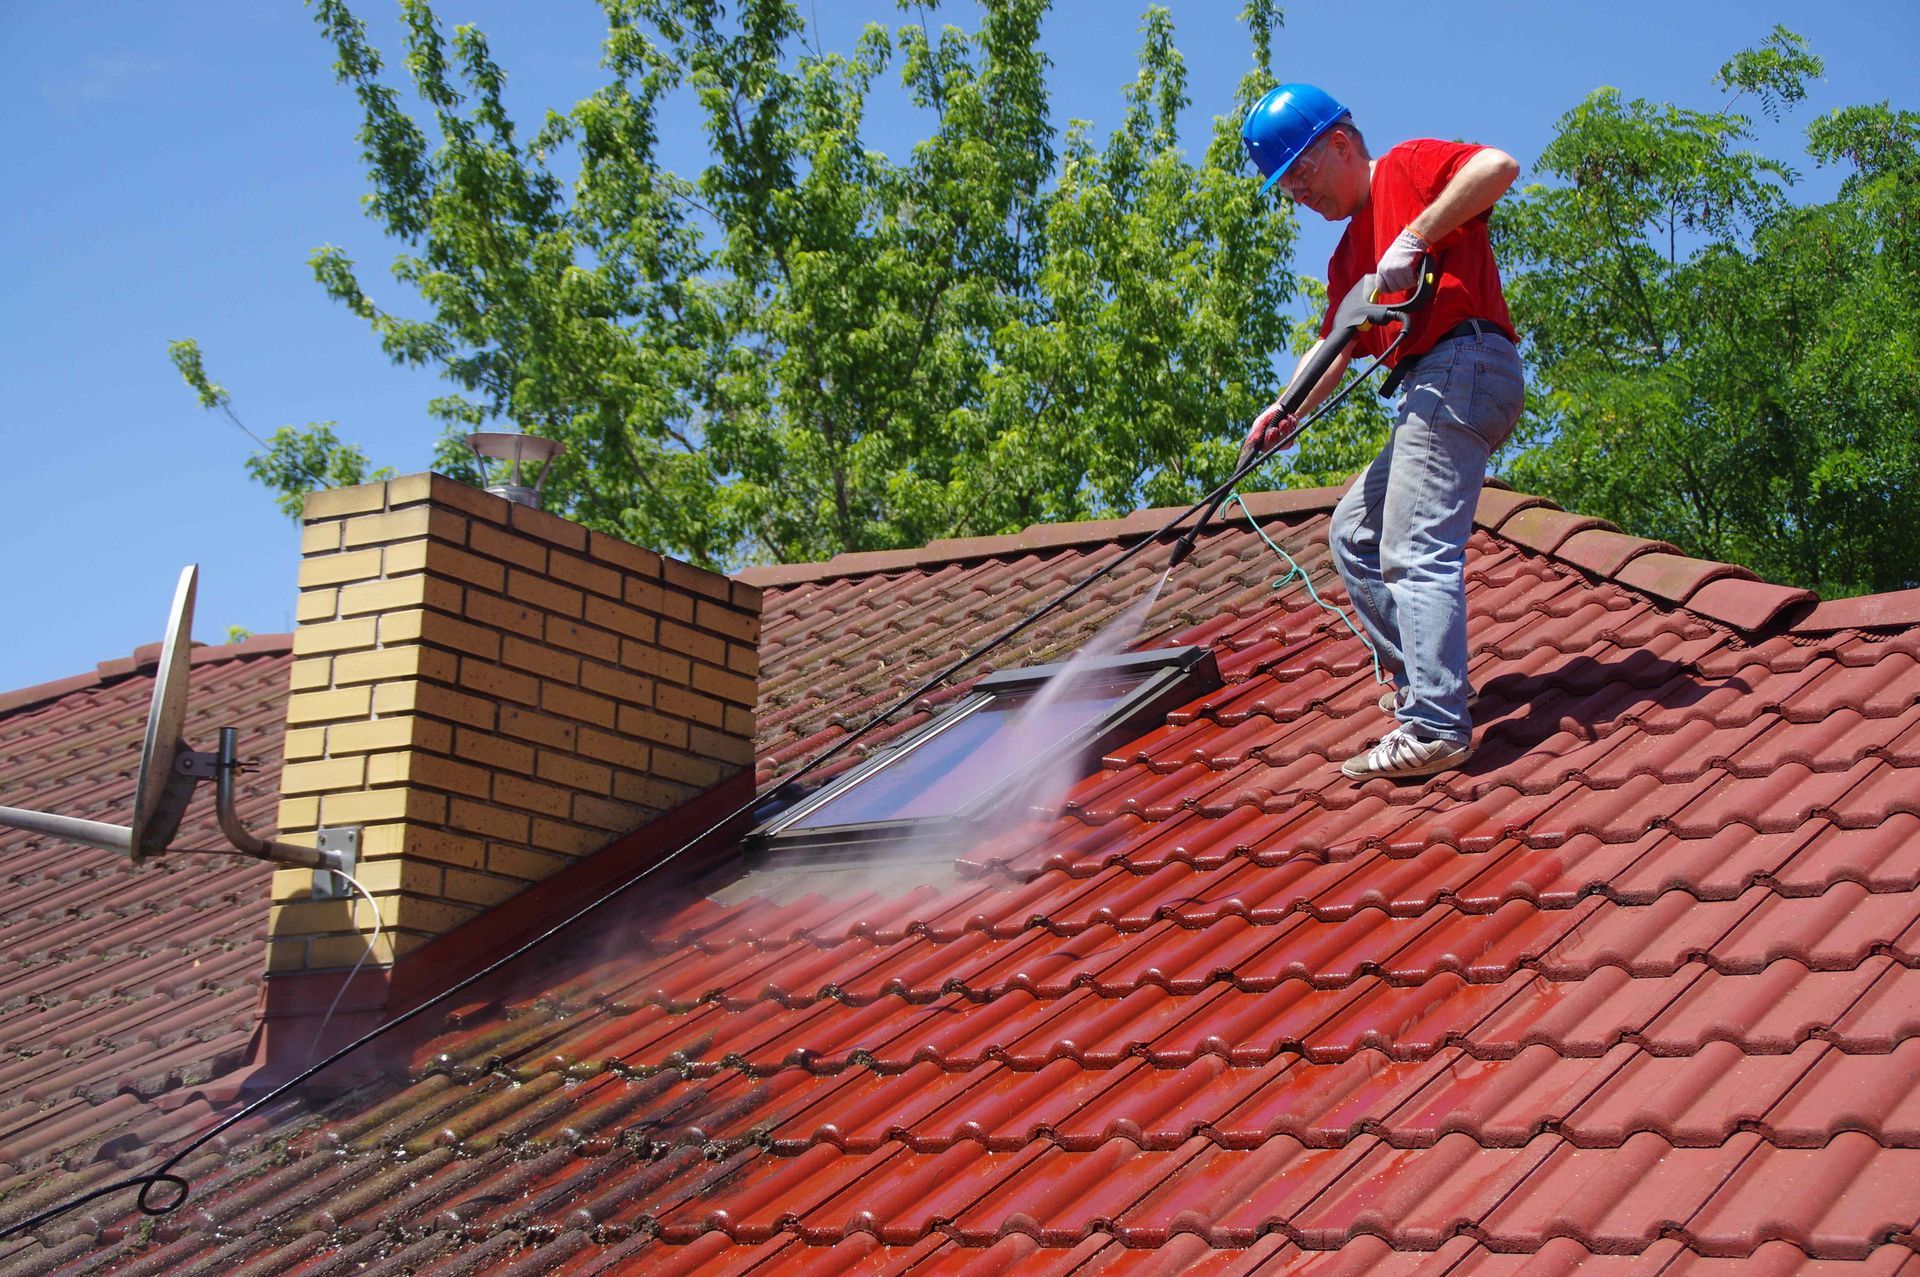 A man is cleaning a roof with a high pressure washer